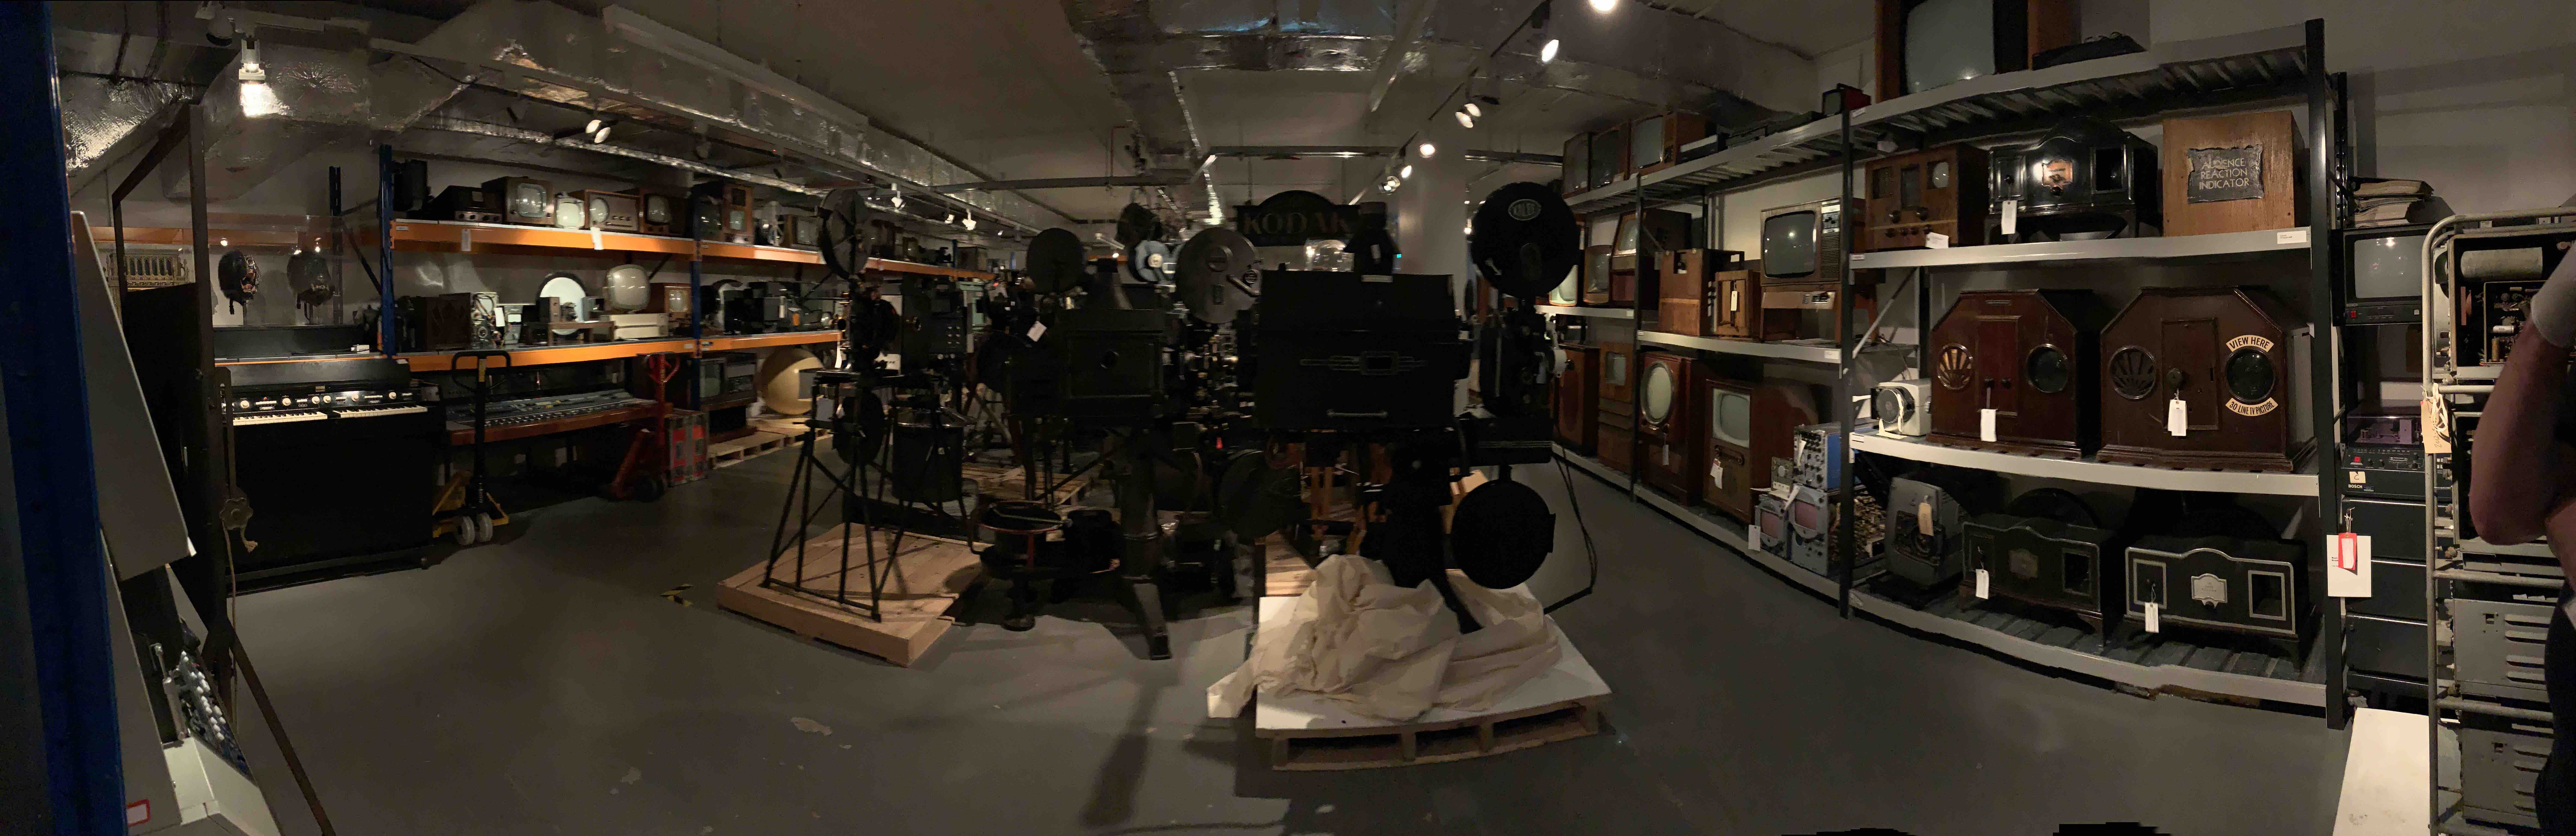 Panorama of the various ratios and television broadcasting equipments in storage at the National Science and Media Museum, Bradford